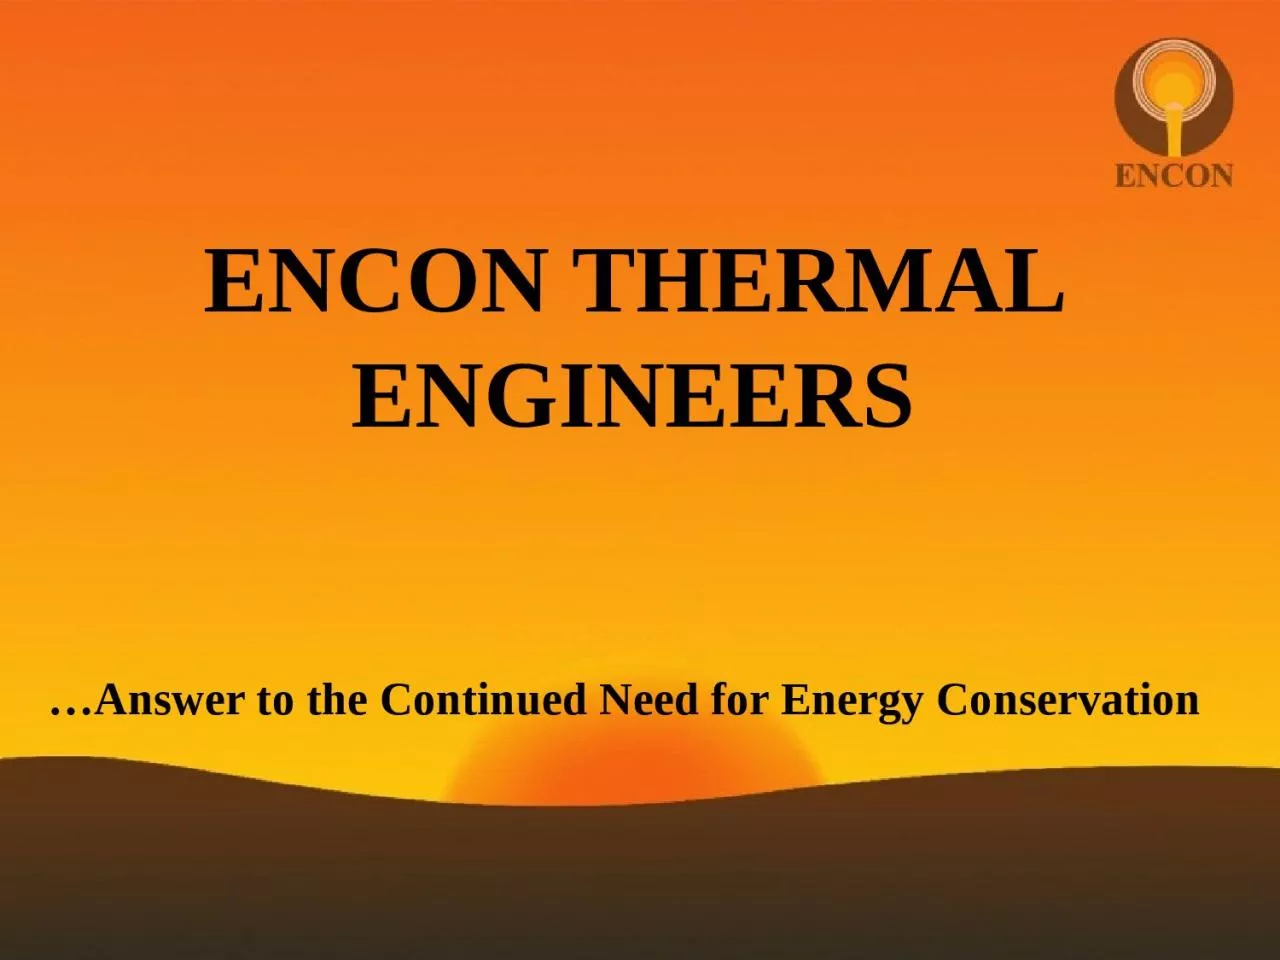 ENCON THERMAL ENGINEERS …Answer to the Continued Need for Energy Conservation